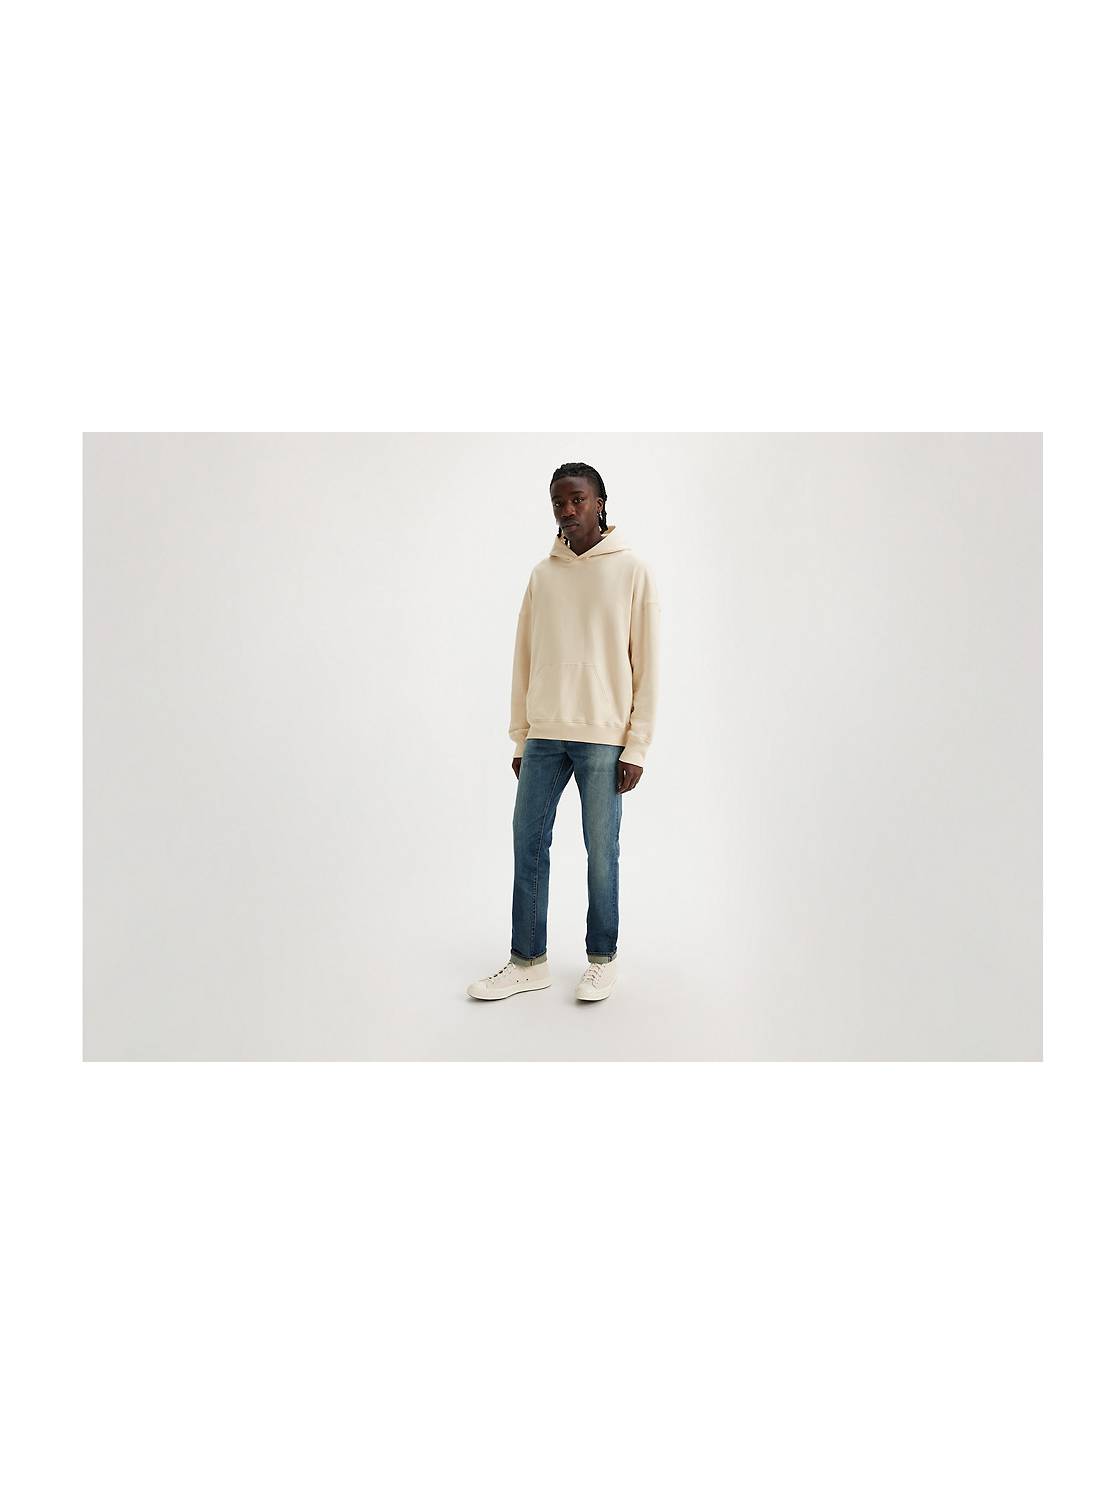 Levi's® Made & Crafted™ x Off-White c/o Virgil Abloh™ - Levi Strauss & Co :  Levi Strauss & Co